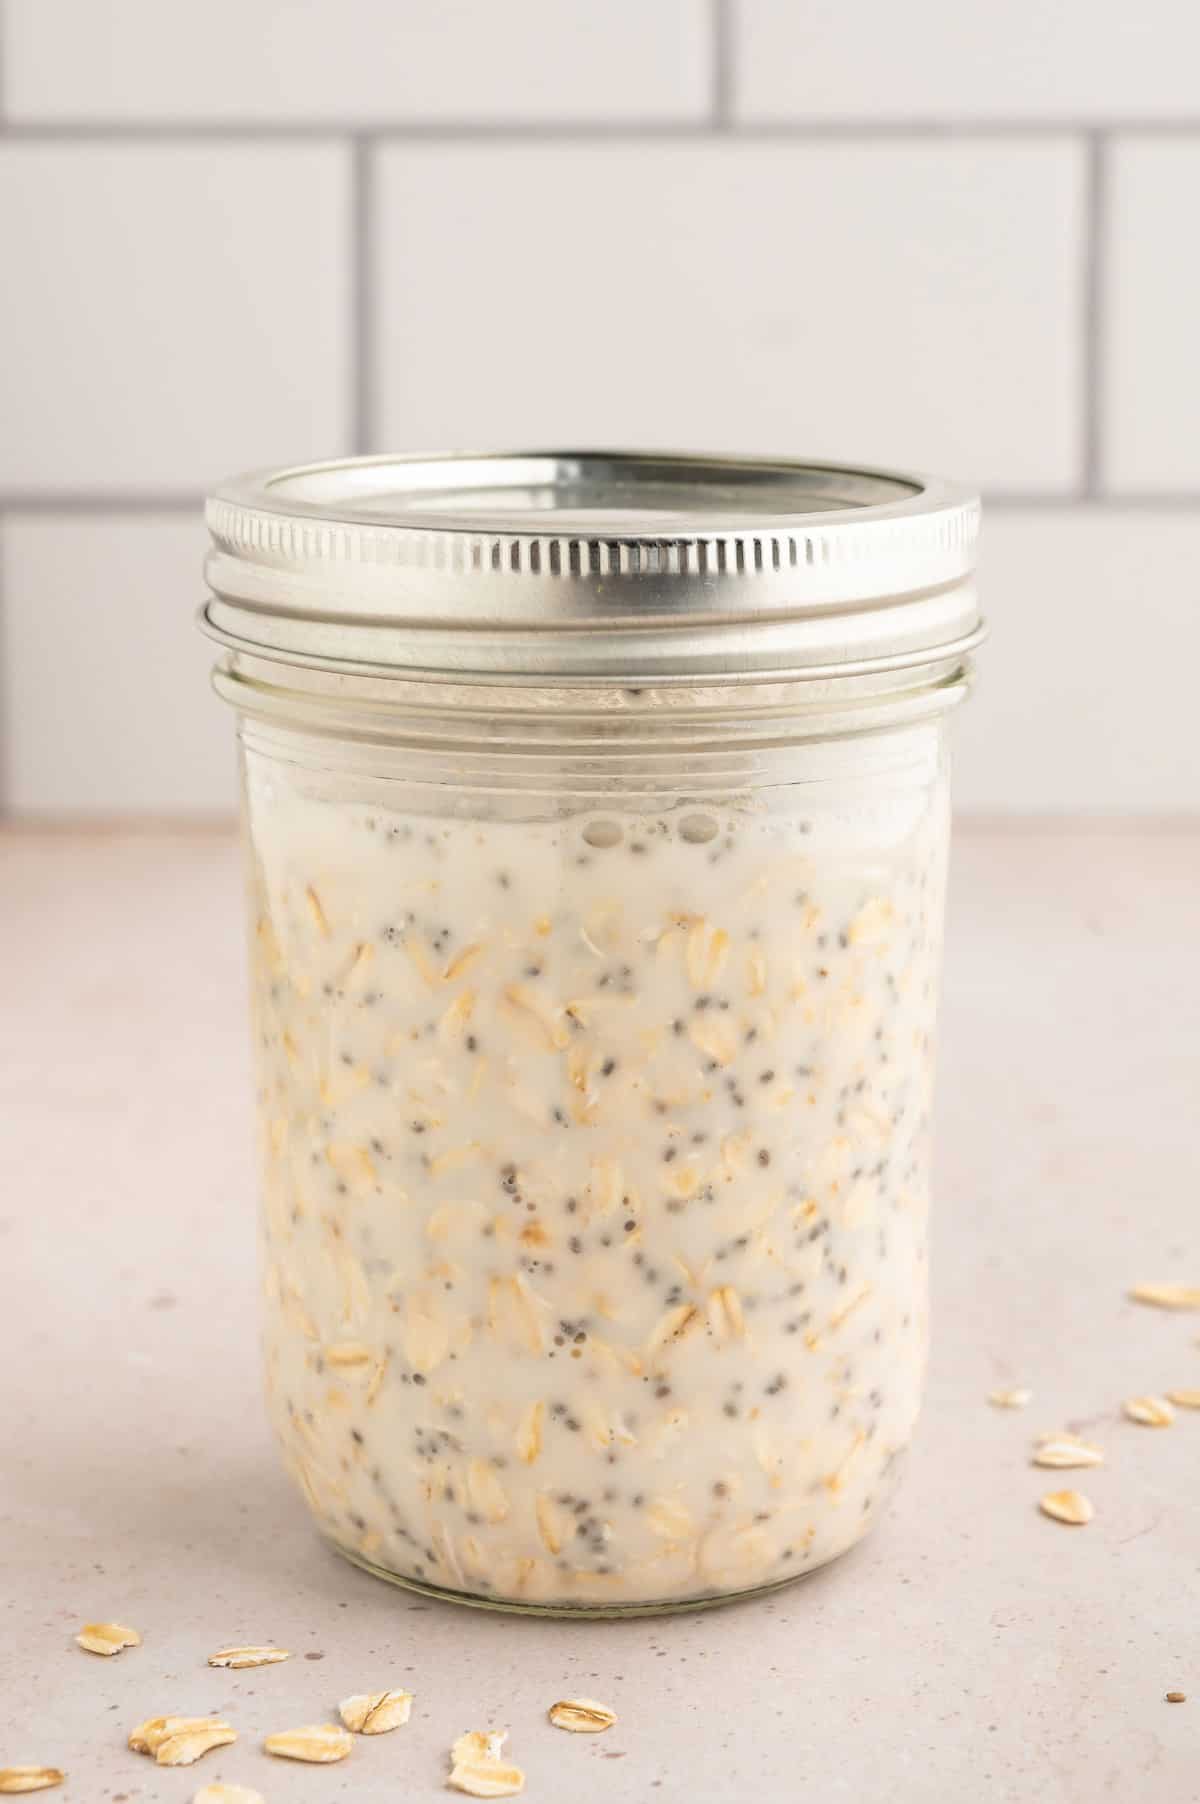 Overnight oats mixed in a jar.